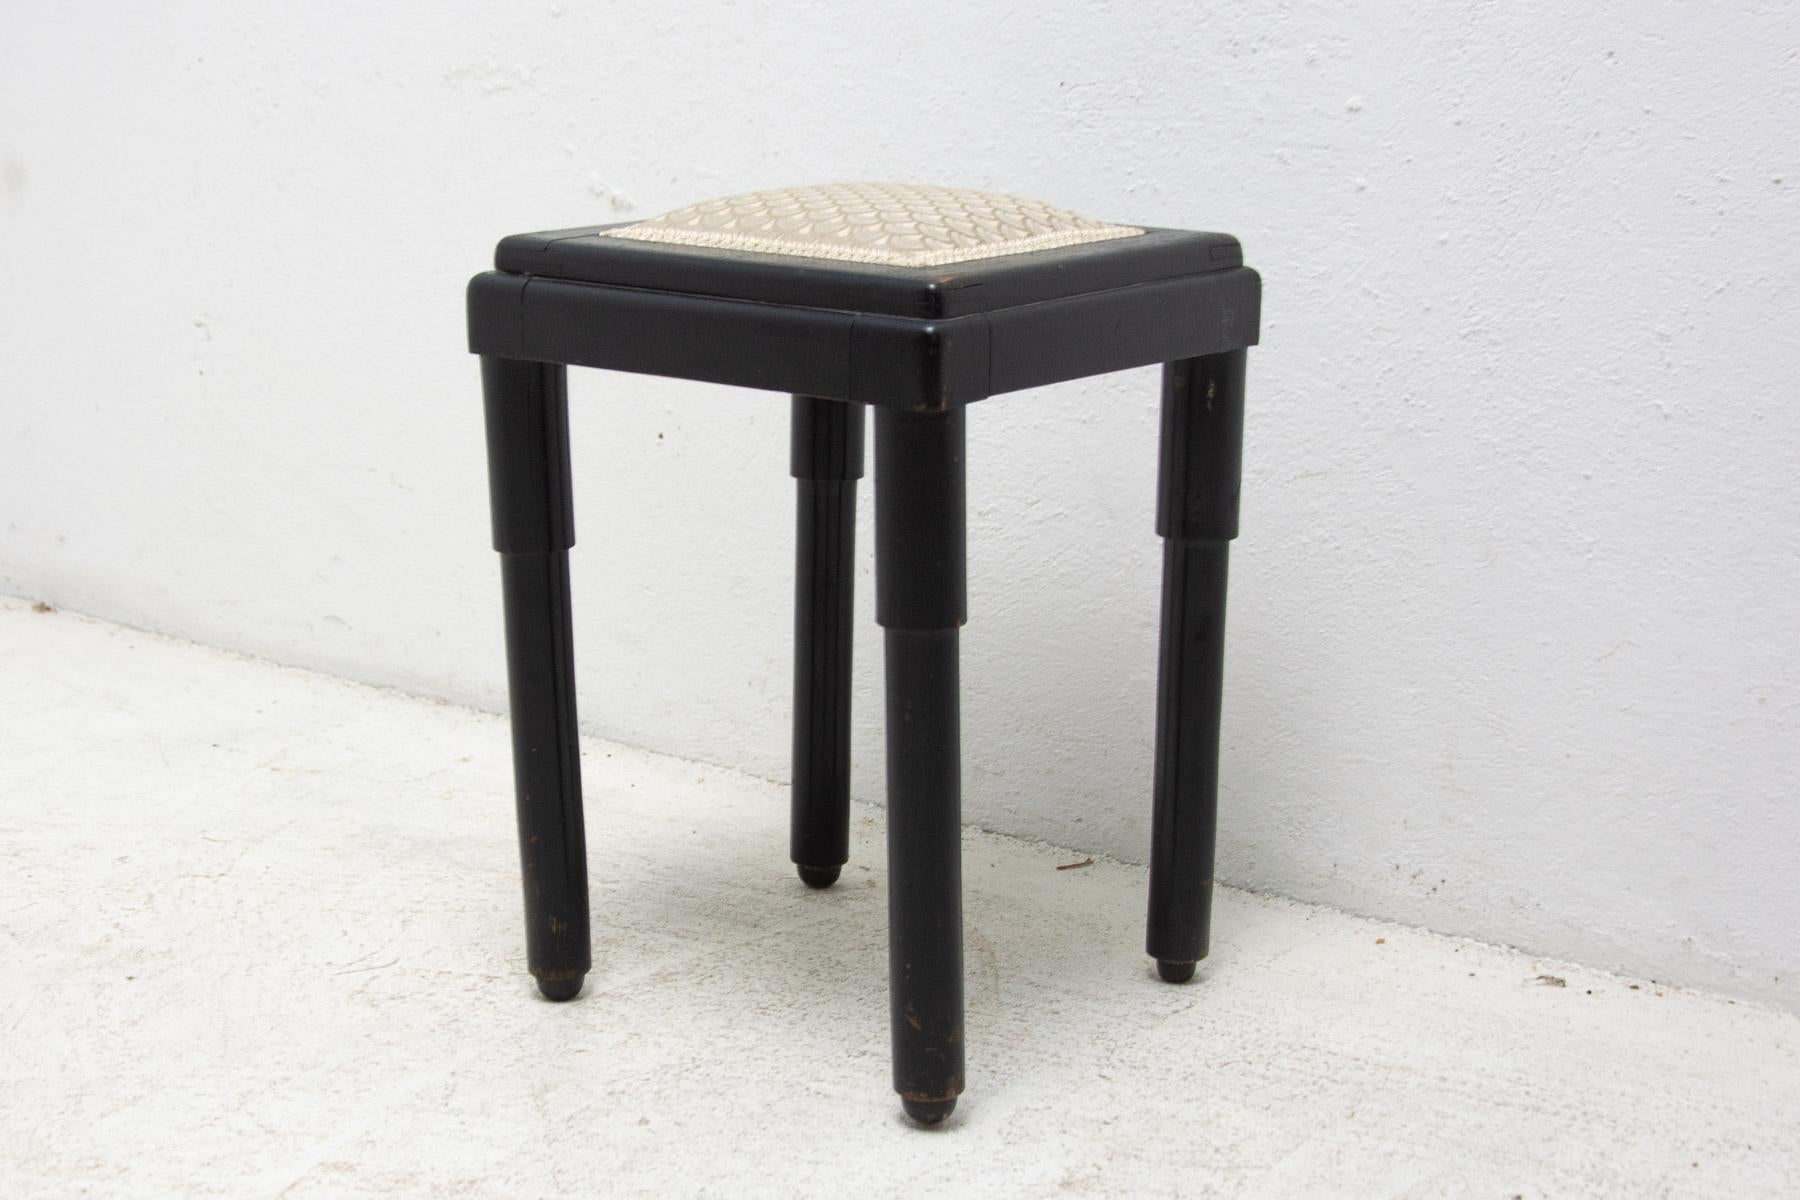 This stool/footrest was made in Austria-Hungary territory around 1910.

It´s made of beech wood and it´s upholstered in fabric. In good condition, new fabric, shows slight signs of age and using.

Height: 48 cm

Width: 35 cm

Depth: 35 cm

Seat